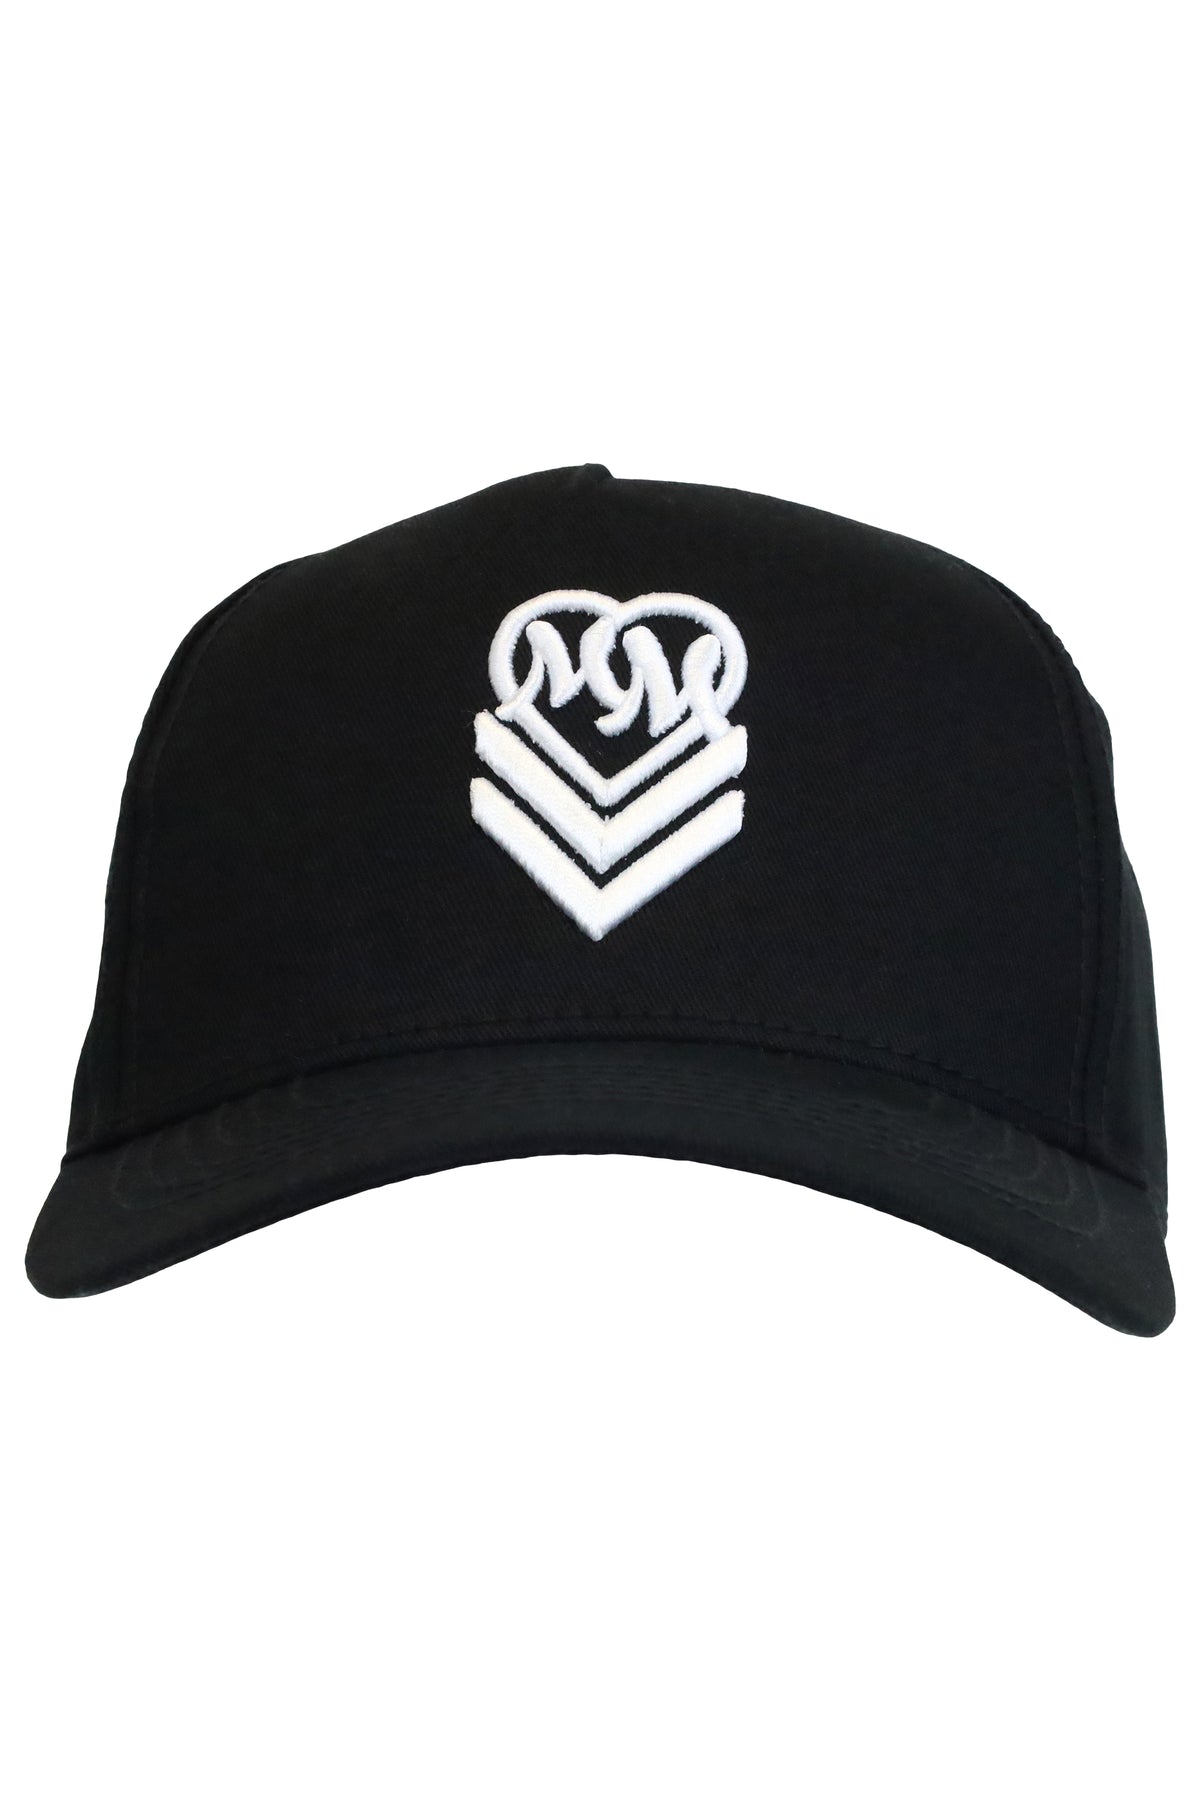 ROSEWING SNAPBACK HAT